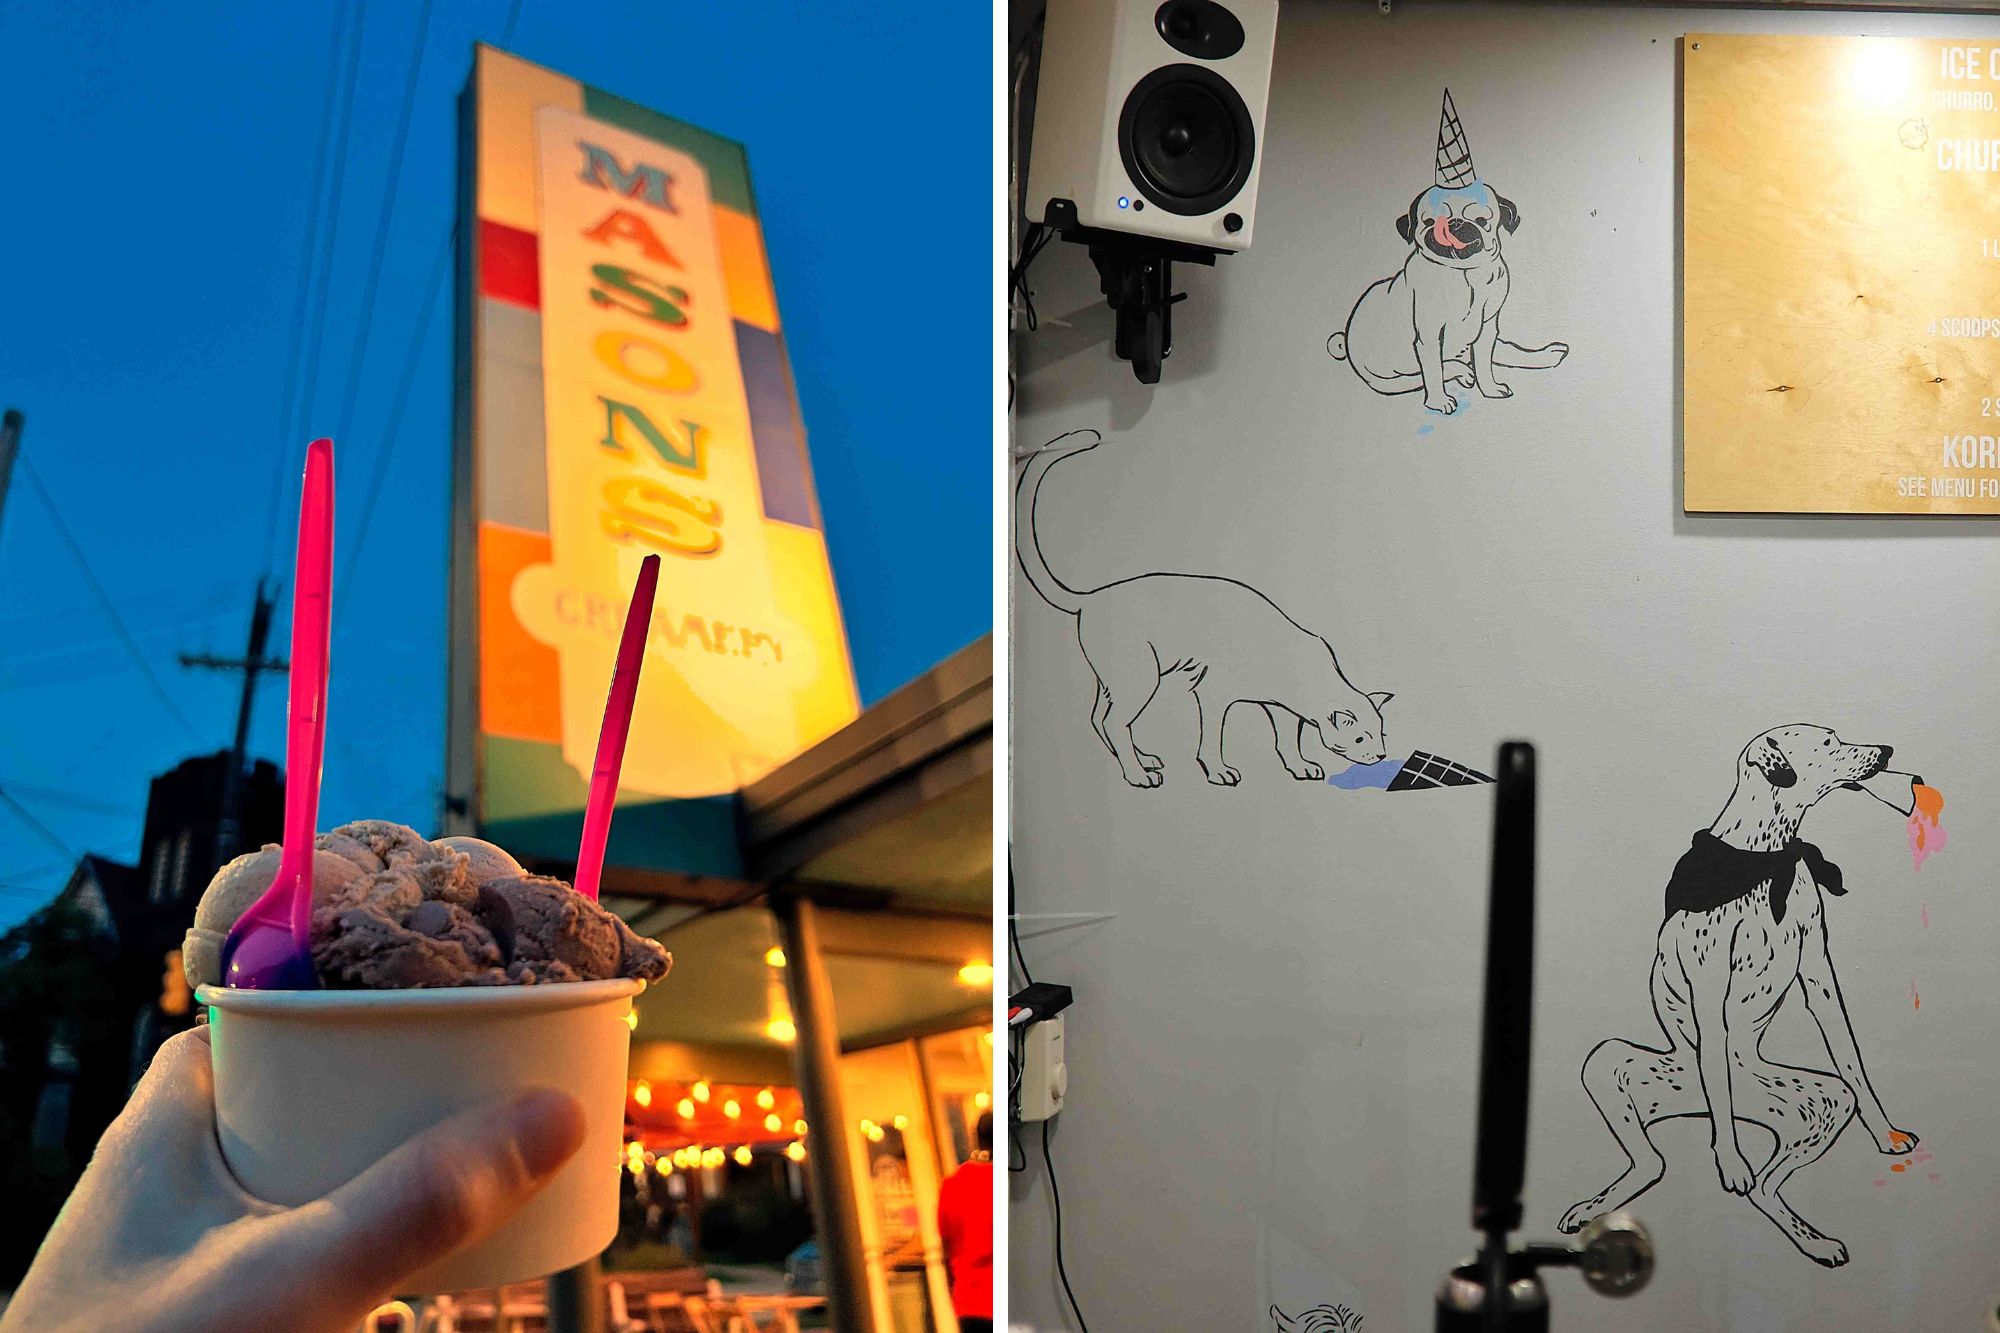 The Mason's Creamery sign with Alyssa holding a cup of ice cream, and a mural of pets with ice cream